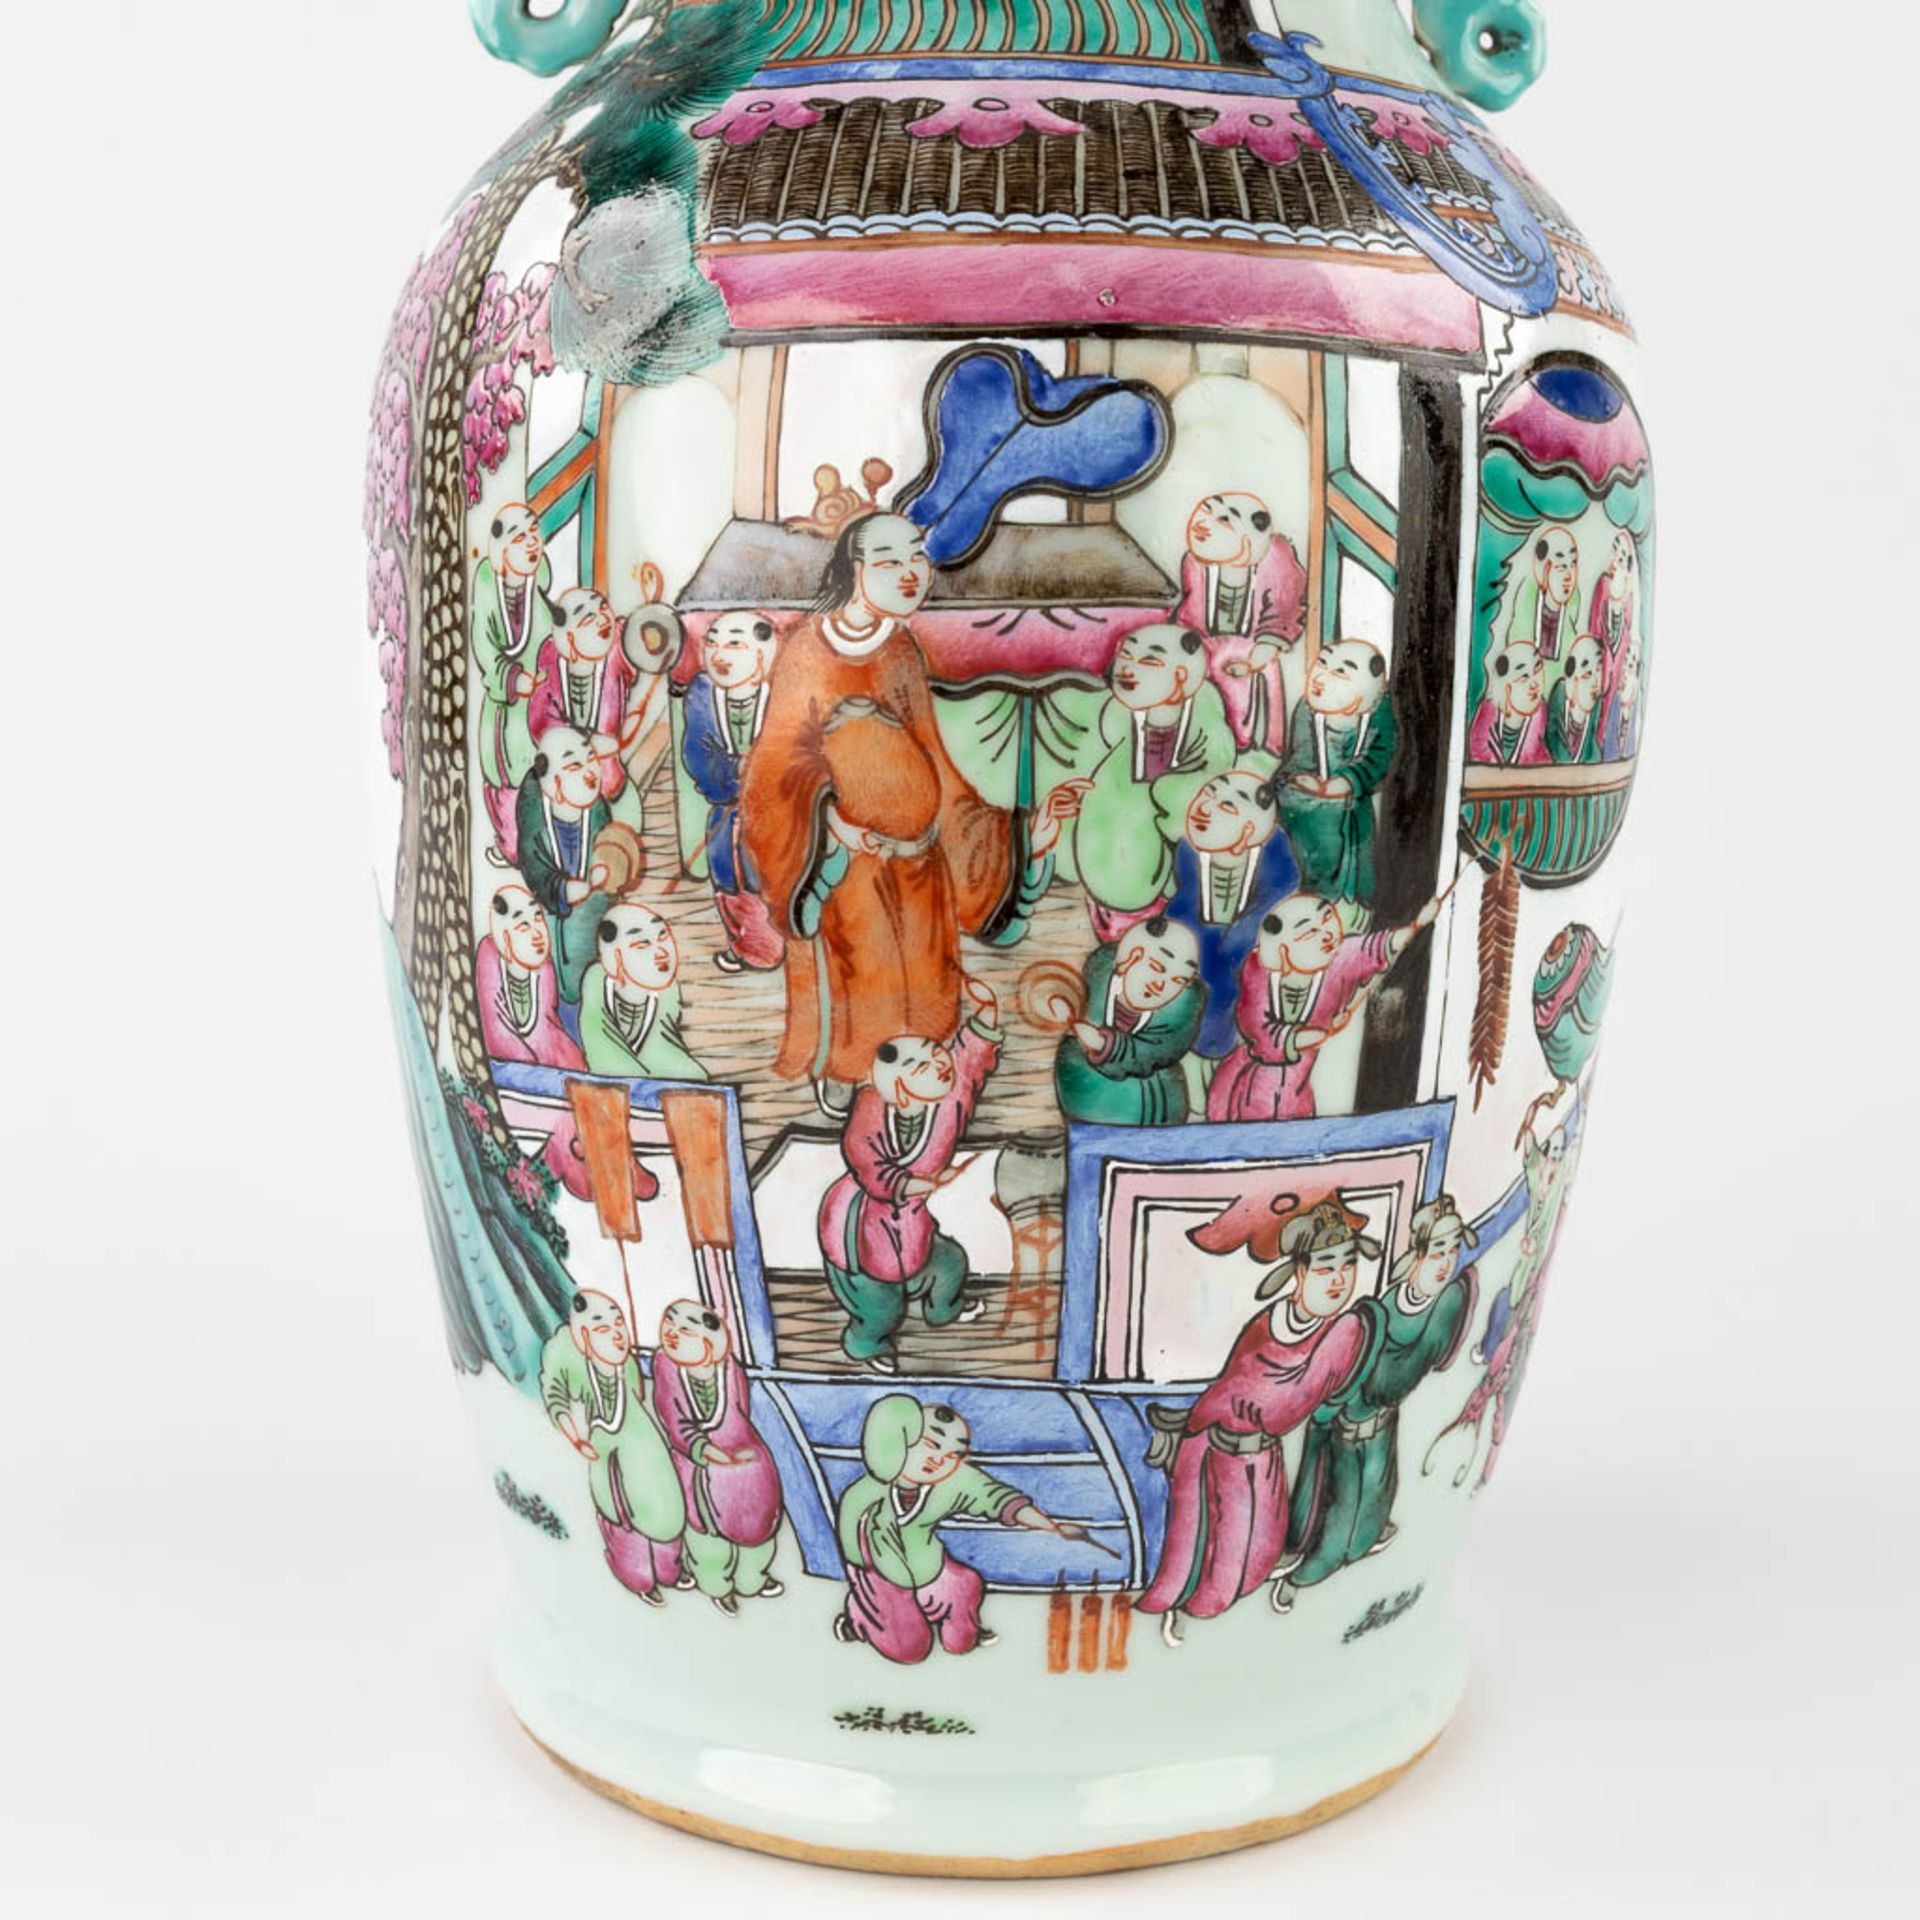 A Chinese Famille Rose '100 Boys' vase. 19th C. (H:44 x D:23 cm) - Image 10 of 13